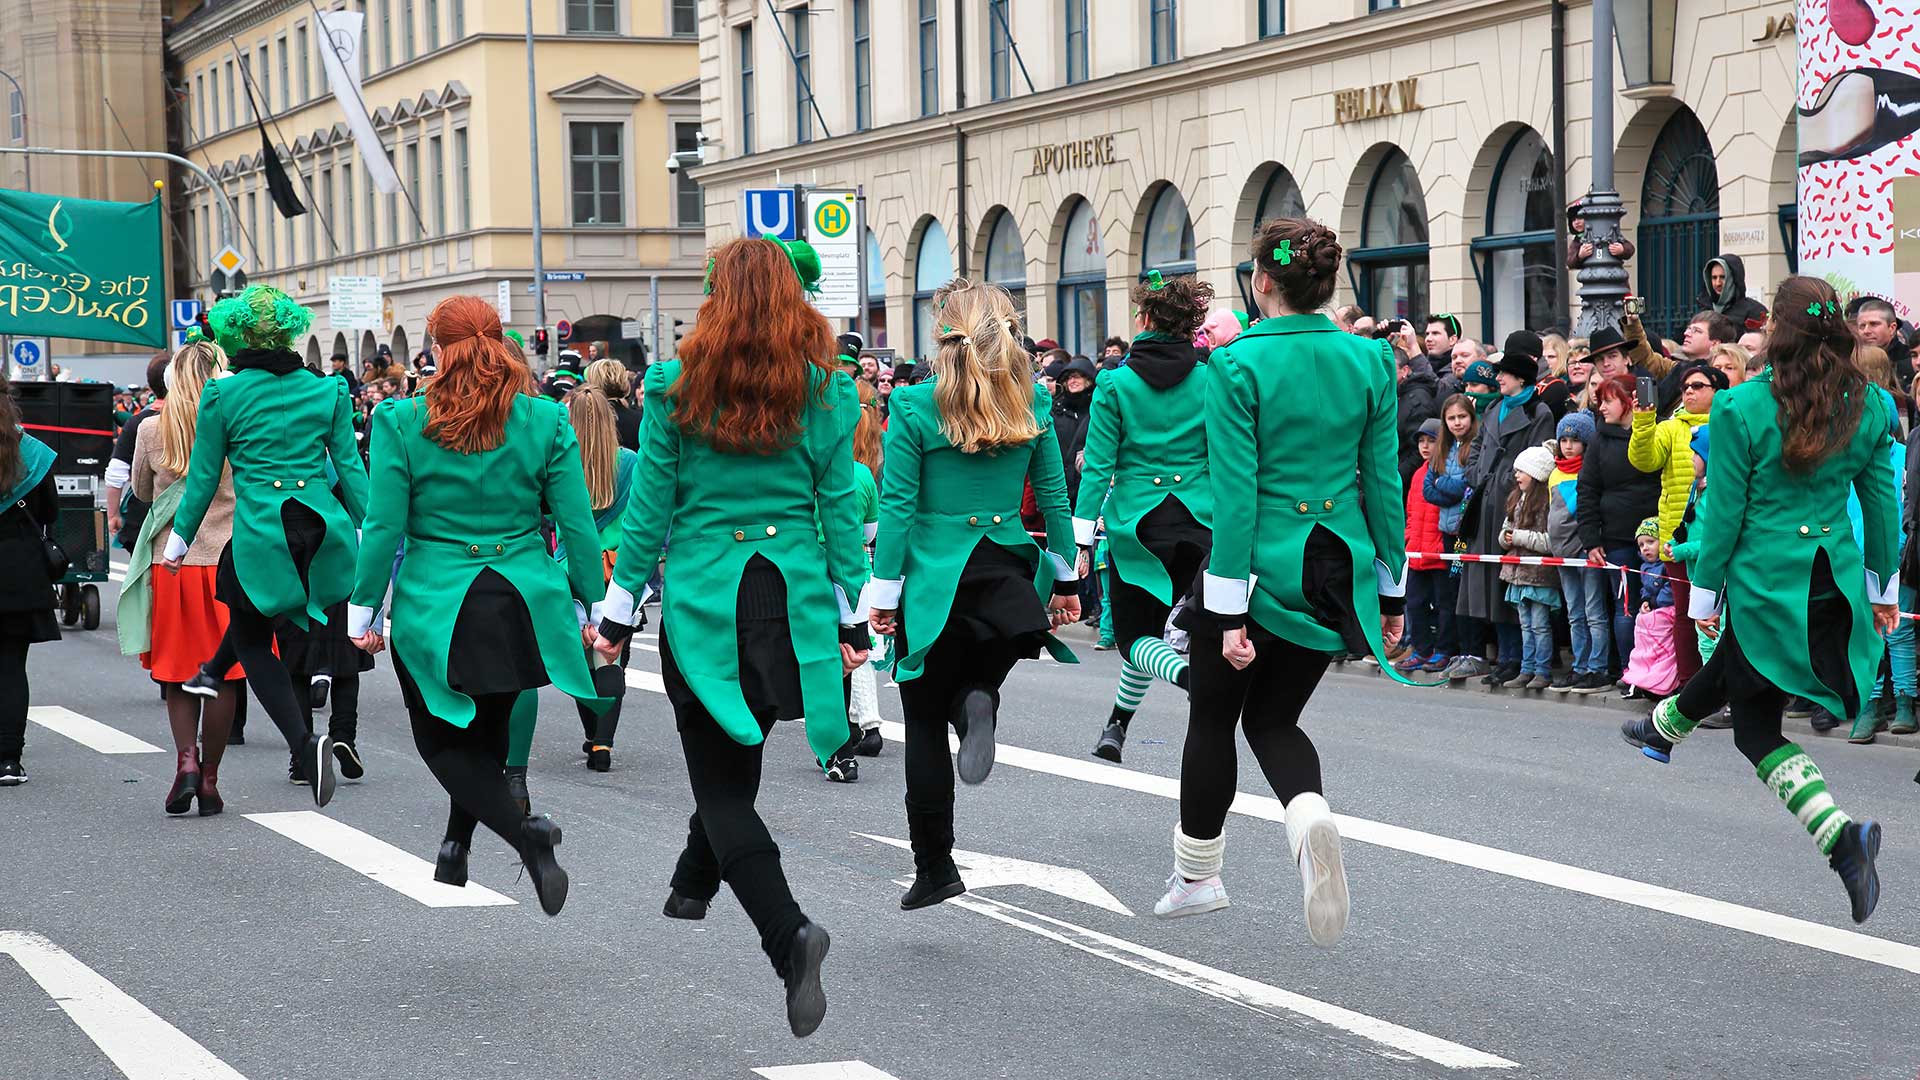 Why We Wear Green on St. Patrick’s Day